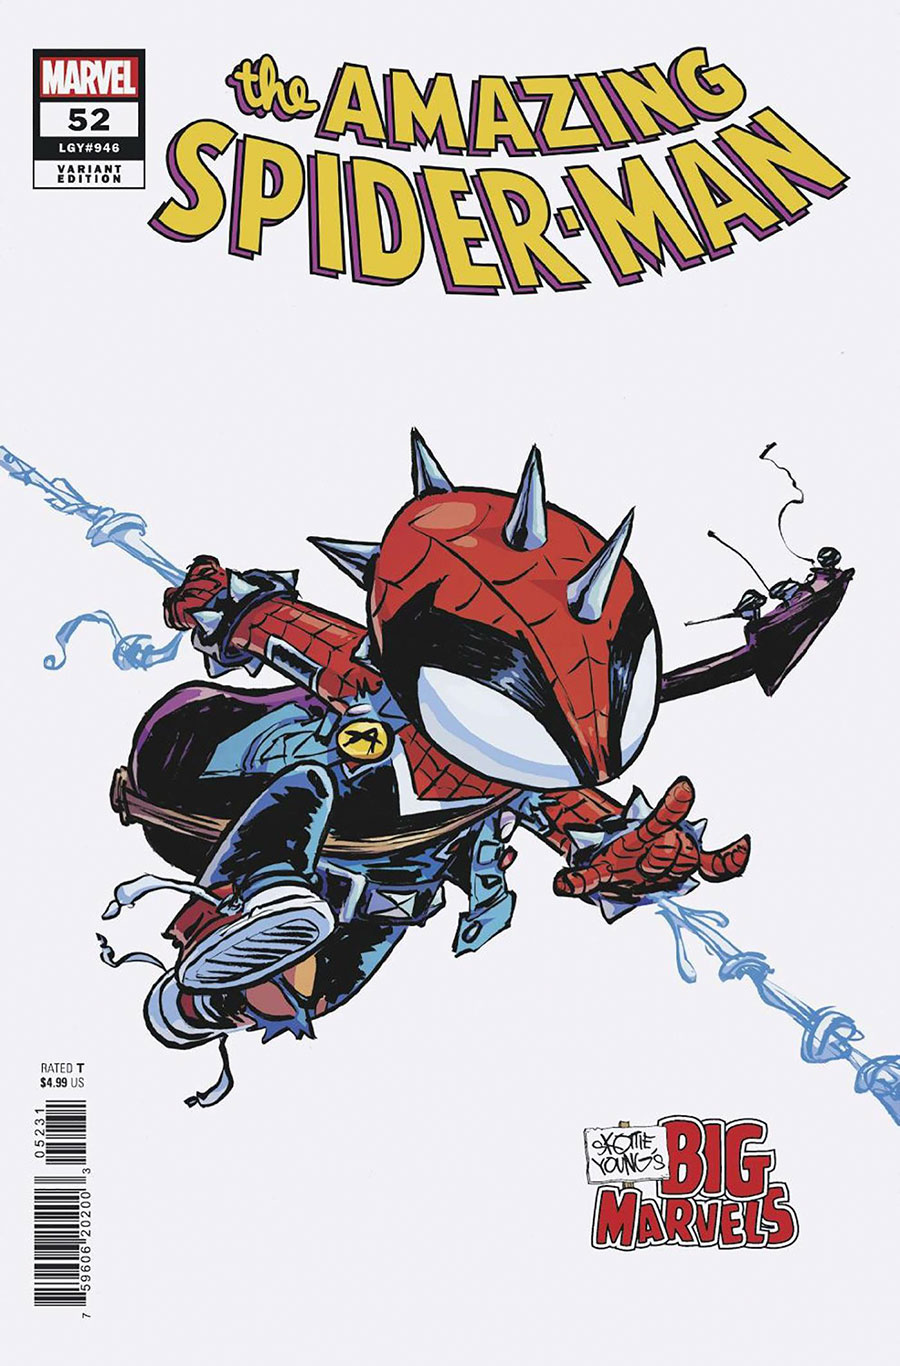 Amazing Spider-Man Vol 6 #52 Cover B Variant Skottie Youngs Big Marvels Cover